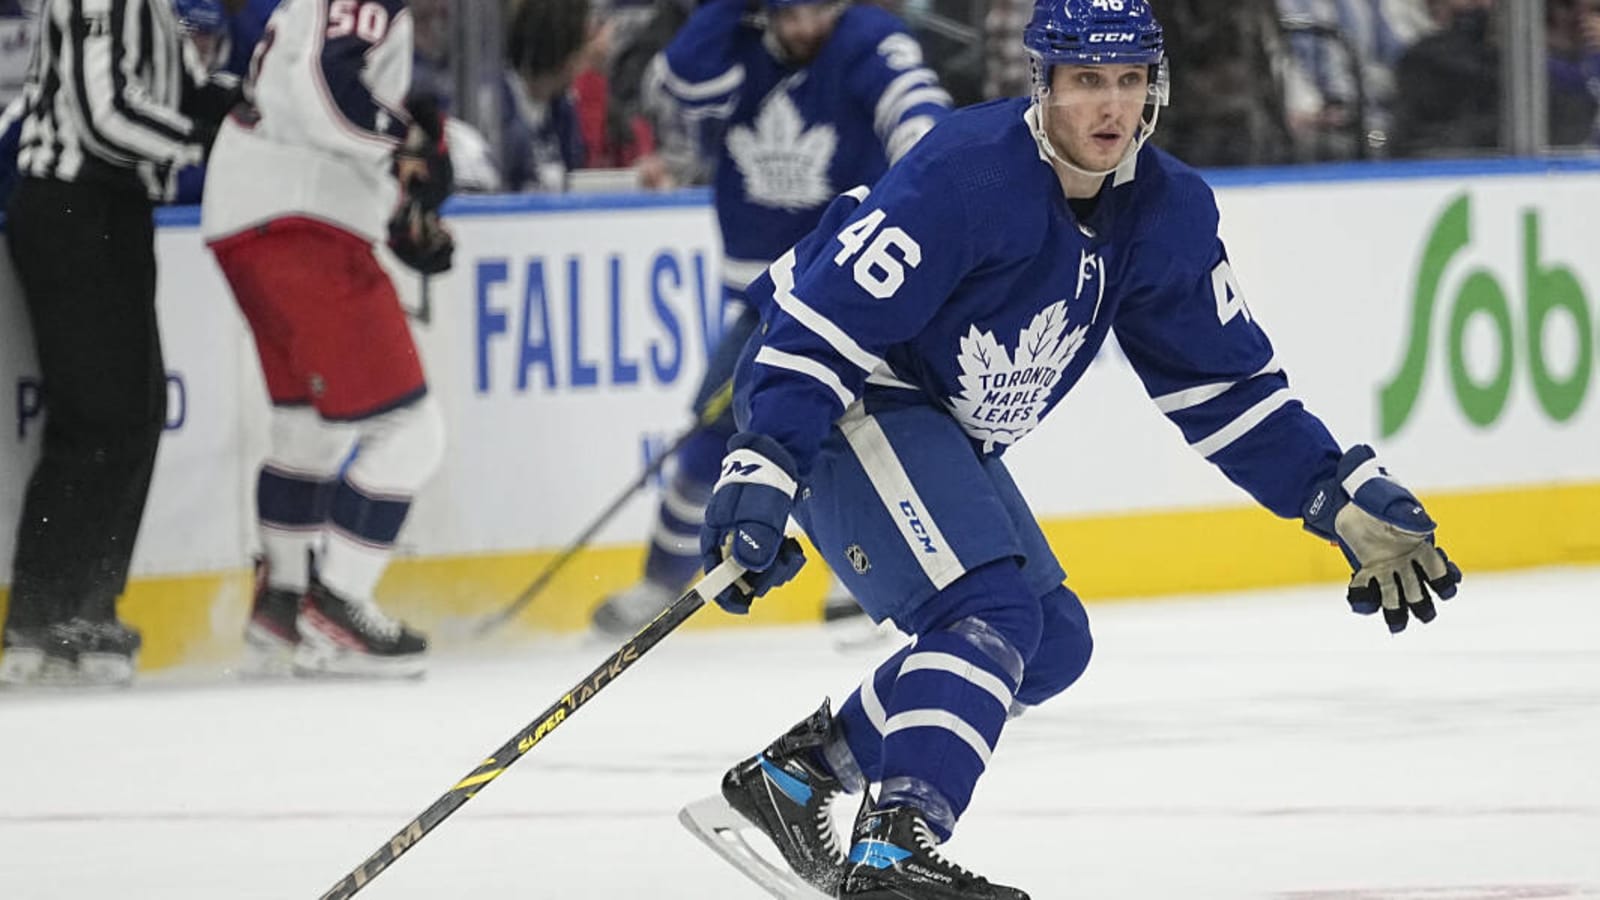 John Tavares and Mitch Marner Miss Maple Leafs Game Against Blues Due to Illness, Marlies Forward Alex Steeves Makes Season Debut